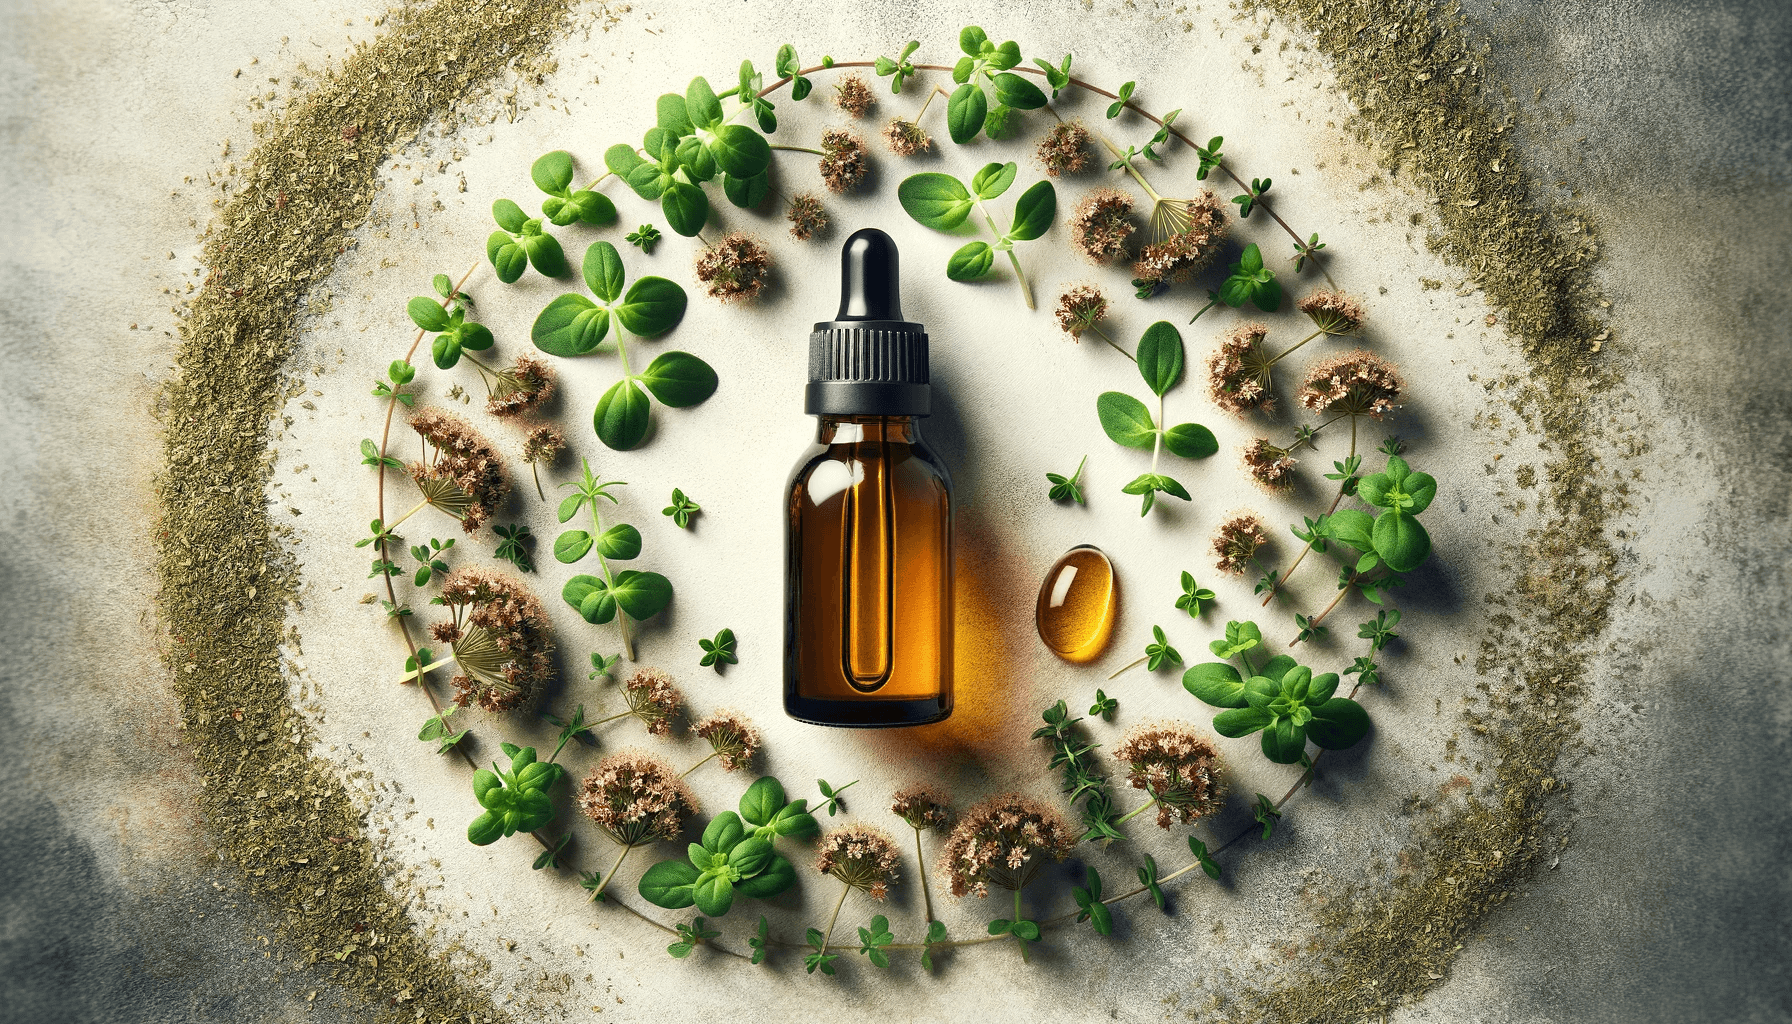 An overhead shot of an open oregano oil bottle with a dropper surrounded by a circle of fresh and dried oregano, showcasing the essence of this herbal product.